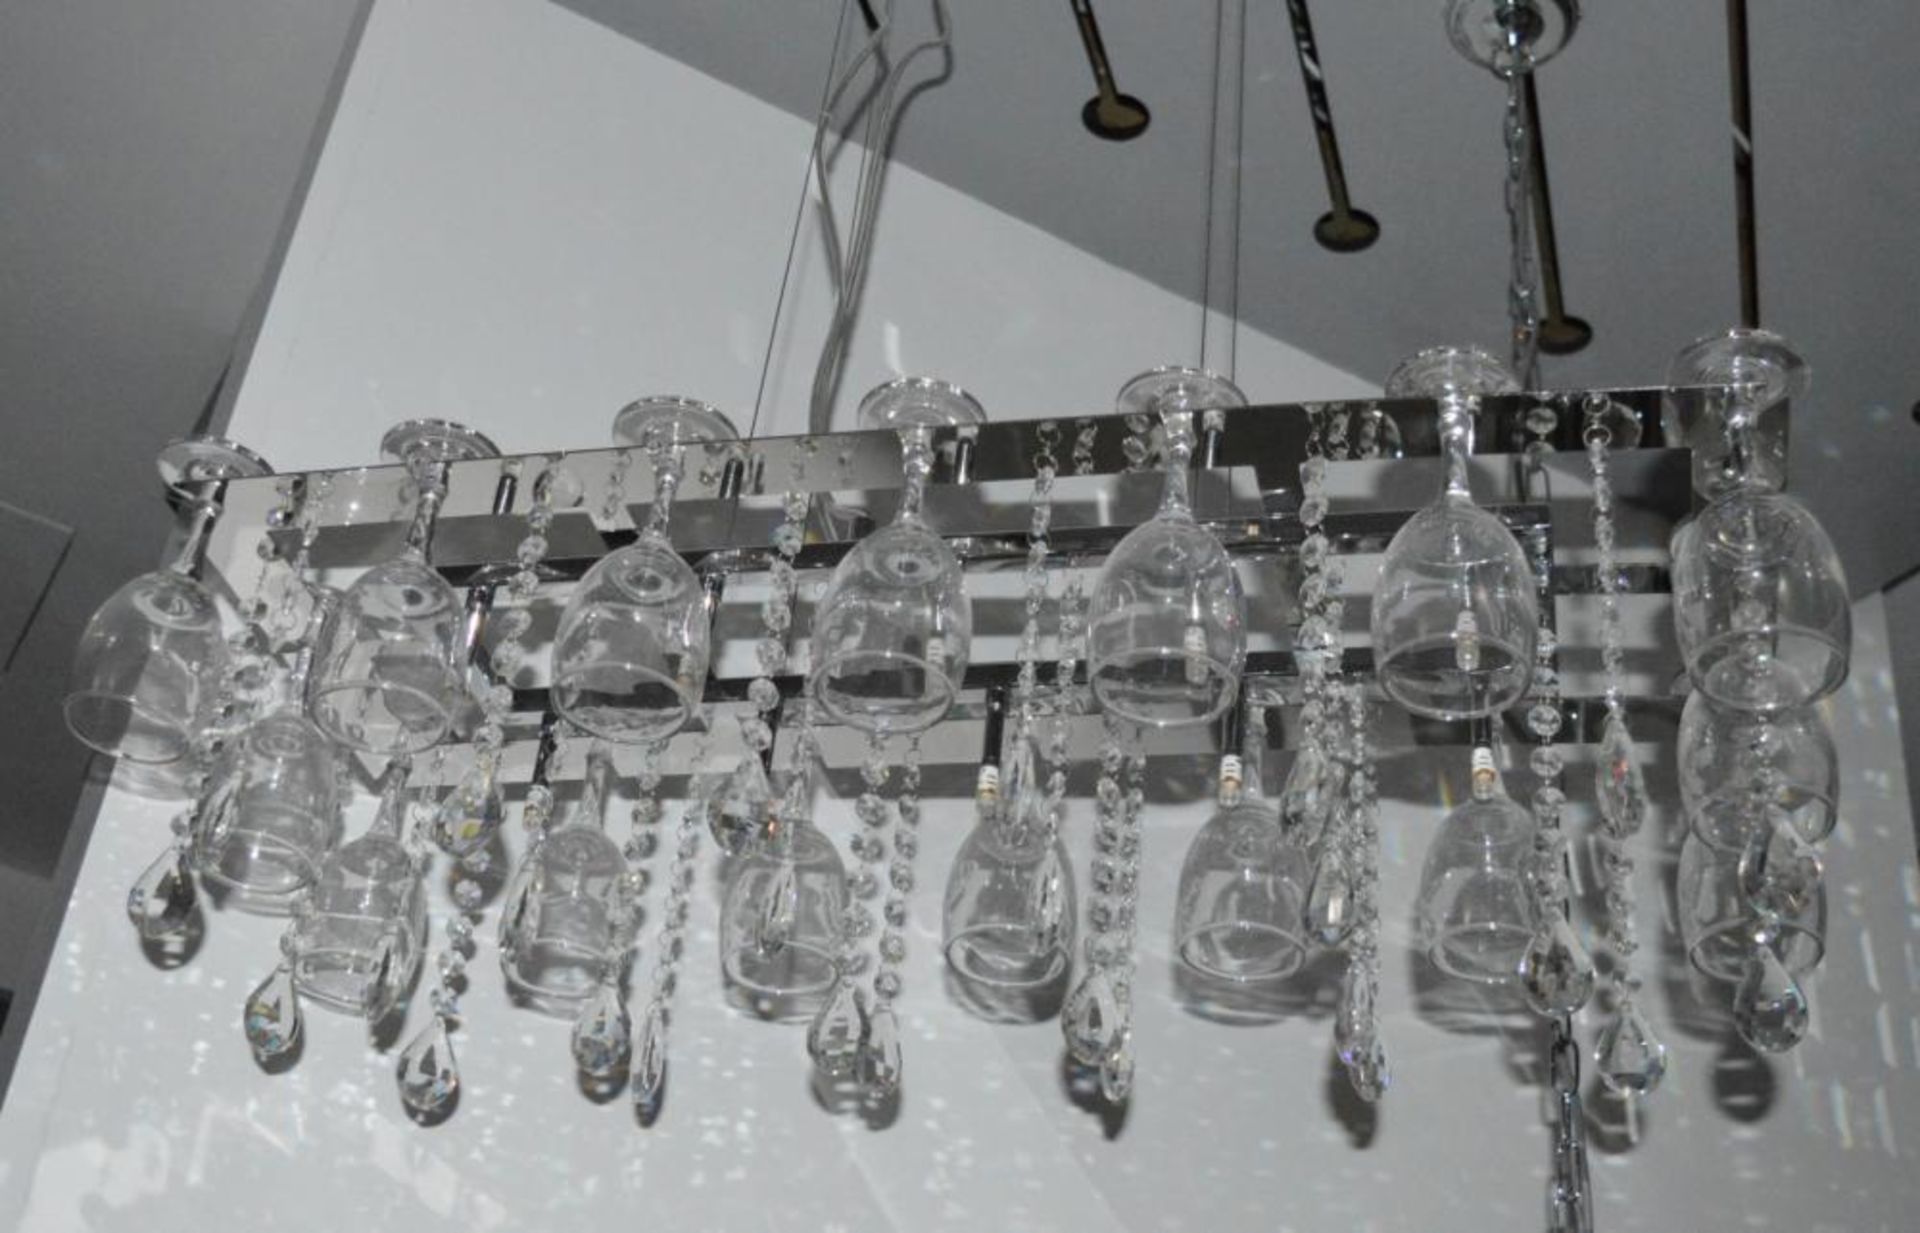 1 x Vino Chrome 10 Light Suspended Light Fitting With Crystal Button Drops and Sixteen Wine Glasses - Image 3 of 7